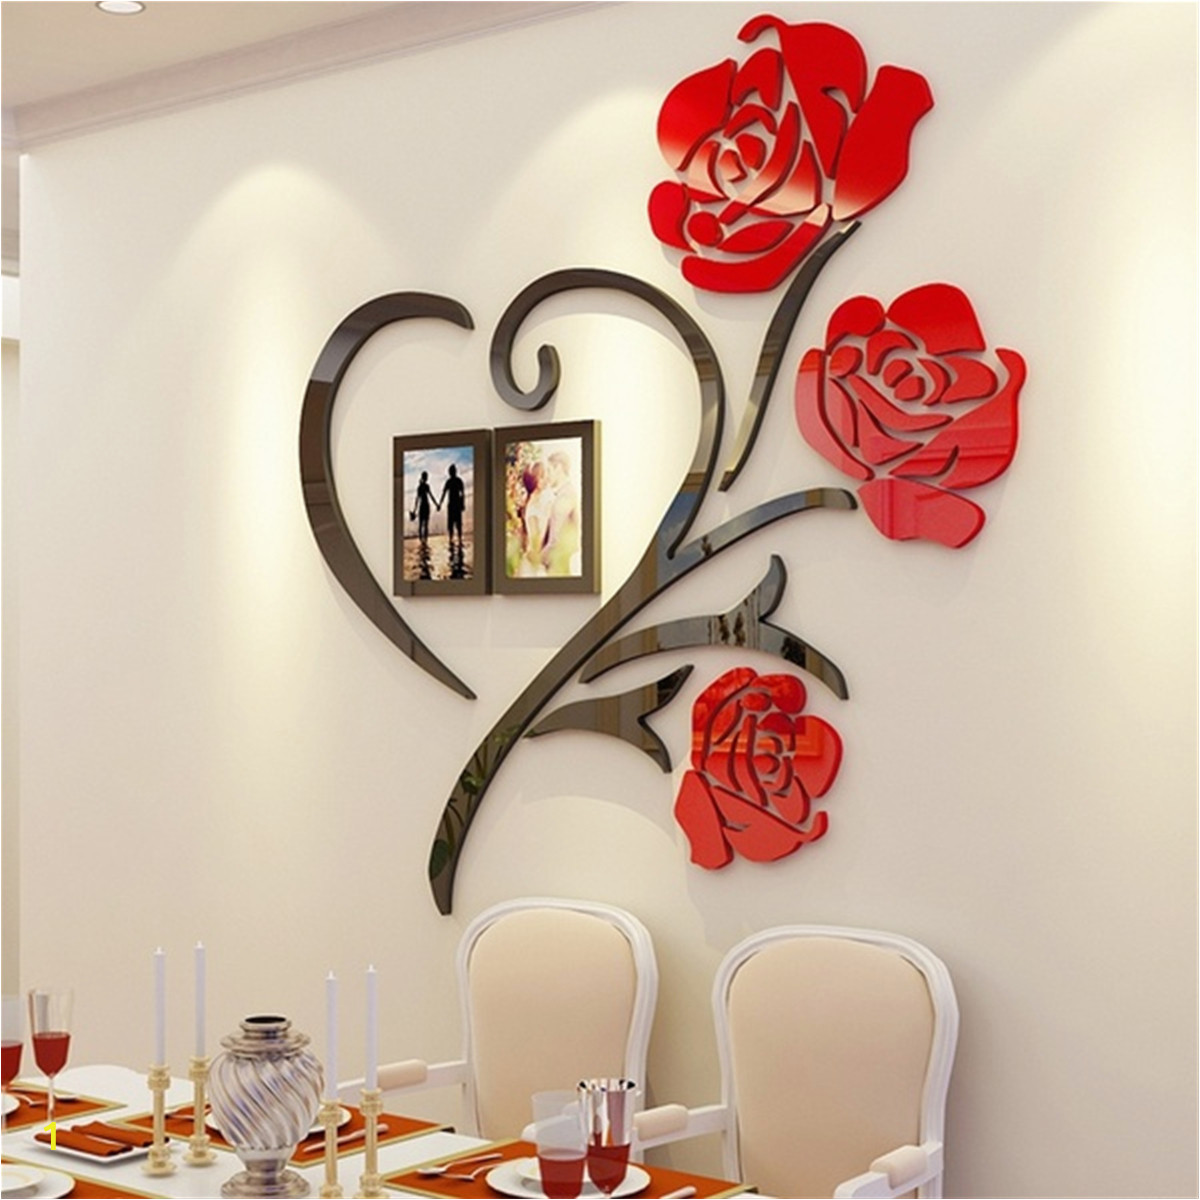 3d Wall Murals for Dining Room Details About 3d Acrylic Wall Sticker Love Rose Frame Art Decor Living Room Home Decal